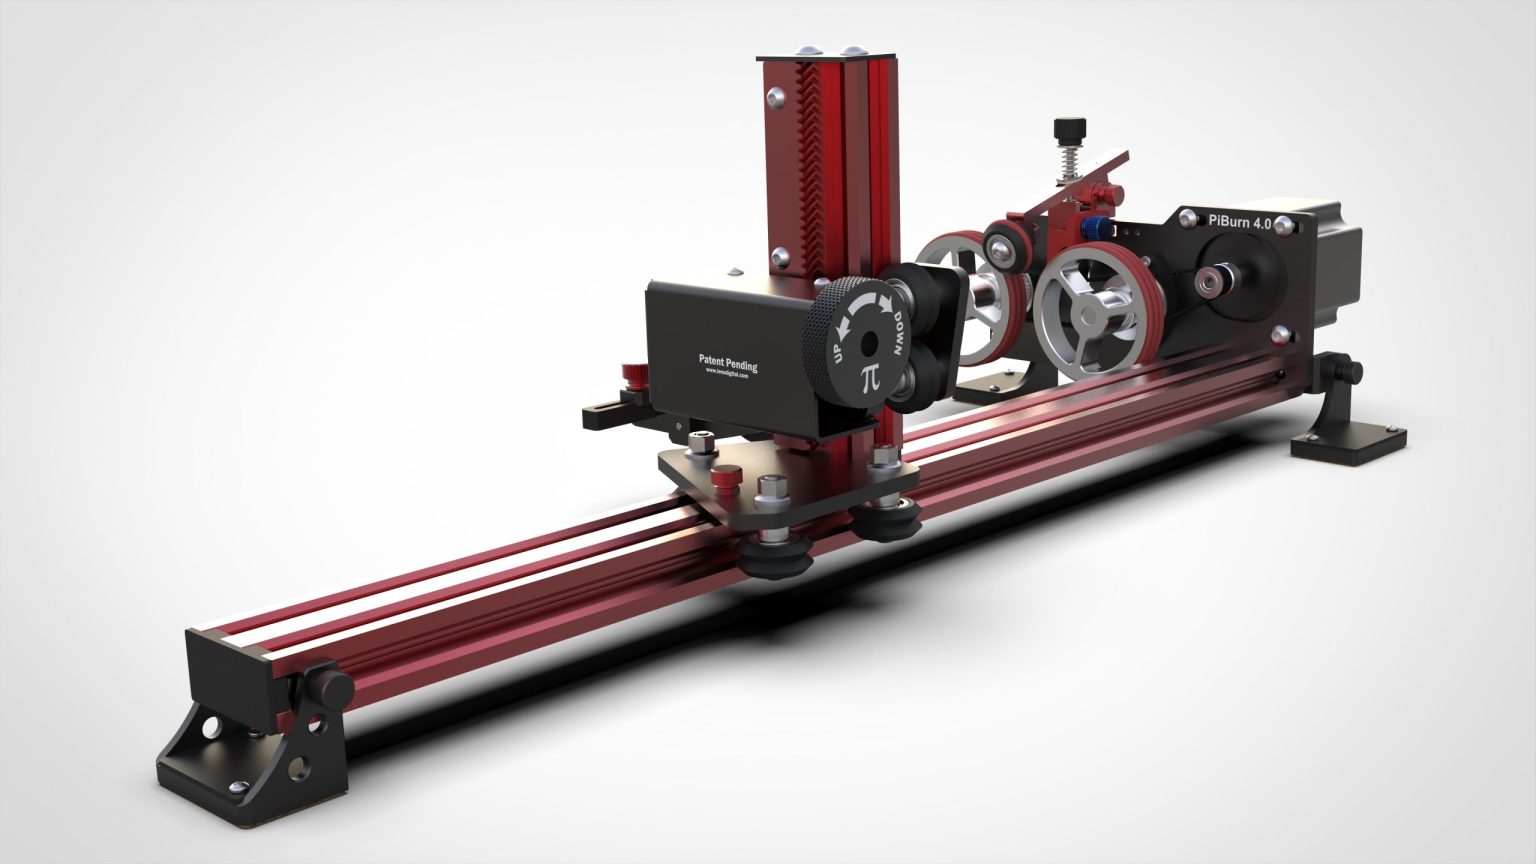 a product photo of a lens digital piburn rotary. a red metallic device with a long rail and adjustments parts to hold a round object for engraving purposes